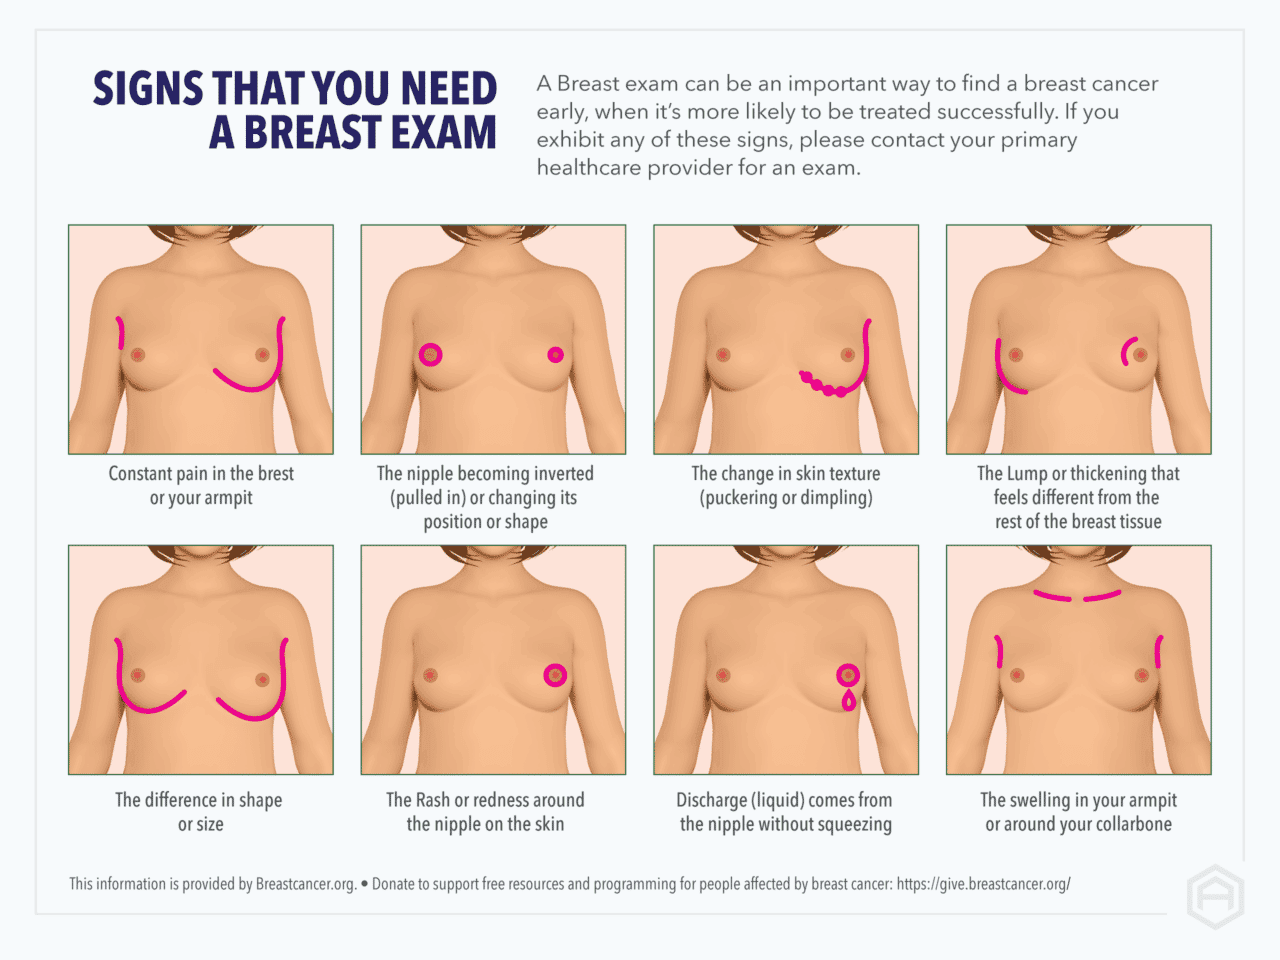 Whatever the size or shape, a healthy breast is best. ▫️ After non-melanoma  skin cancers, breast cancer is the most common cancer amo